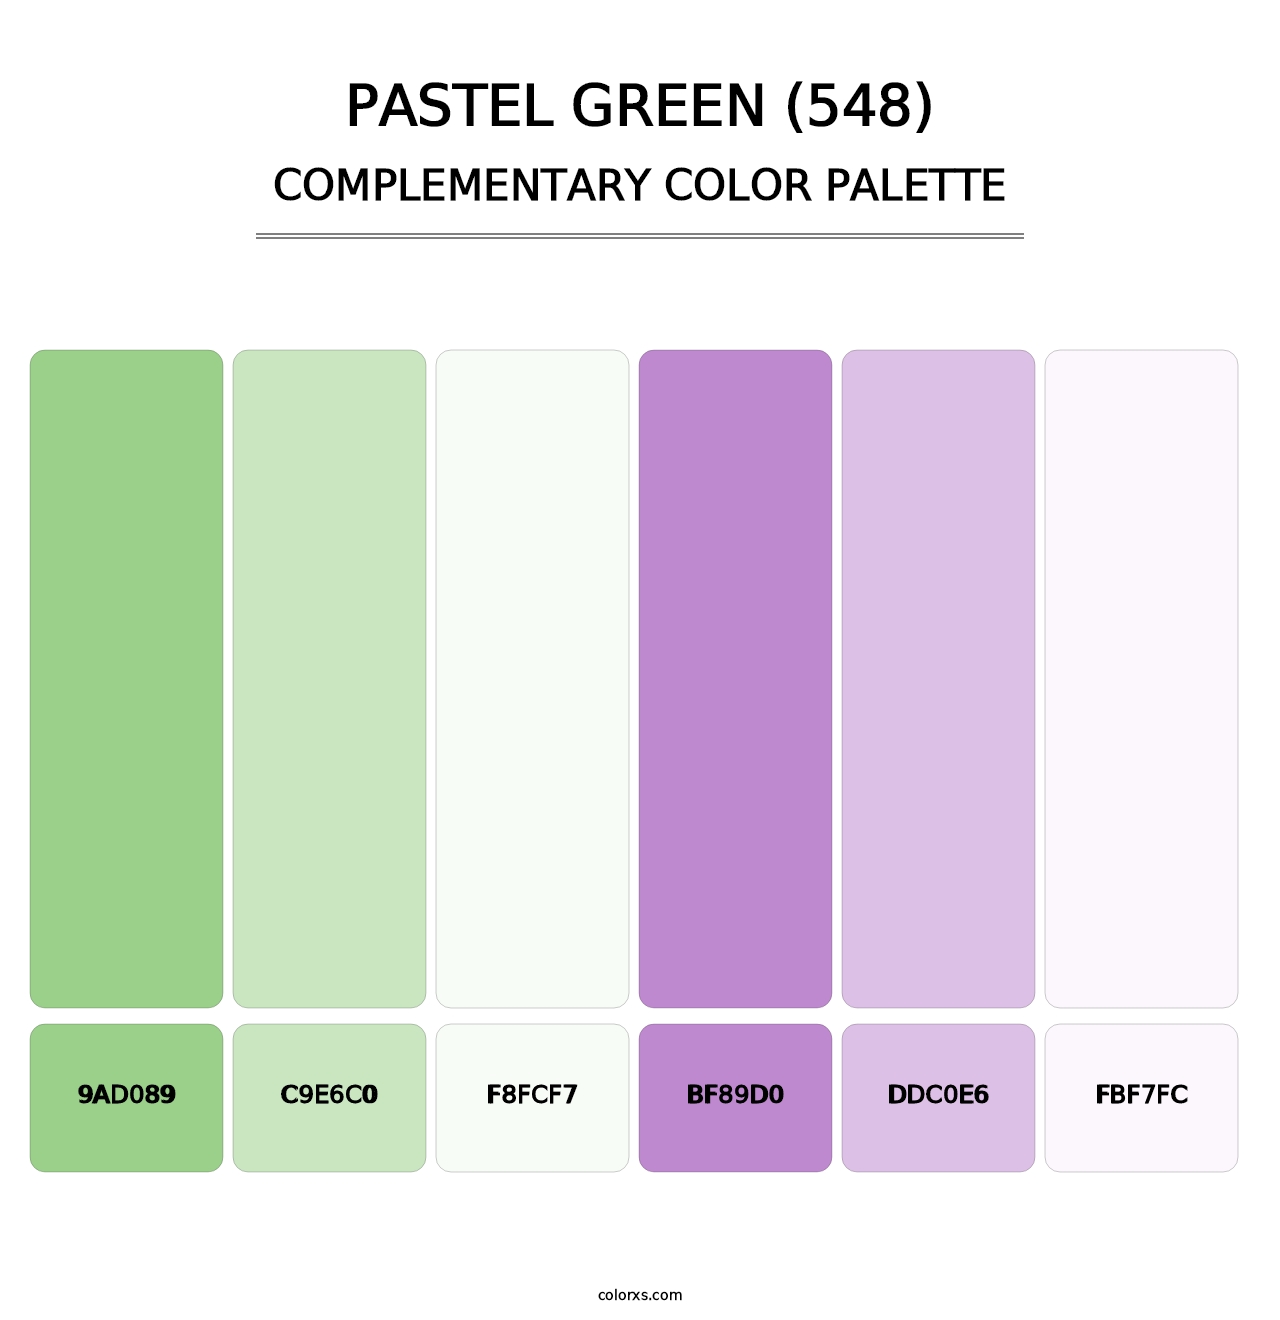 Pastel Green (548) - Complementary Color Palette